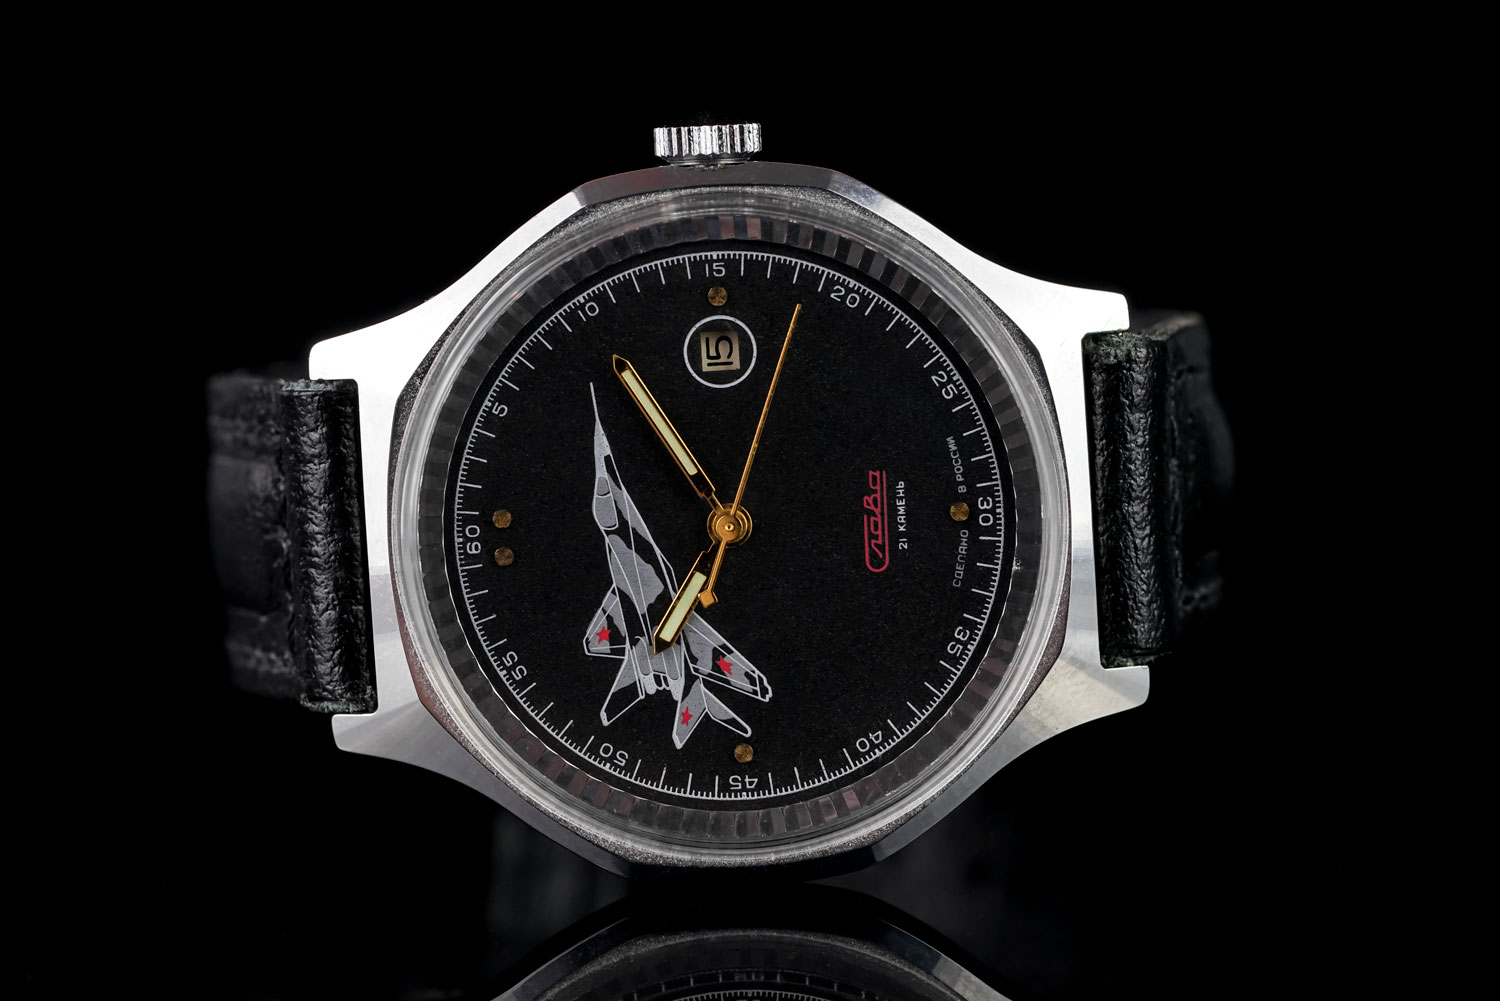 GENTLEMEN'S SLAWA MIG 29 RUSSIAN AIRFORCE CALIBRE 2416 MODEL 045, round, black dial with illuminated